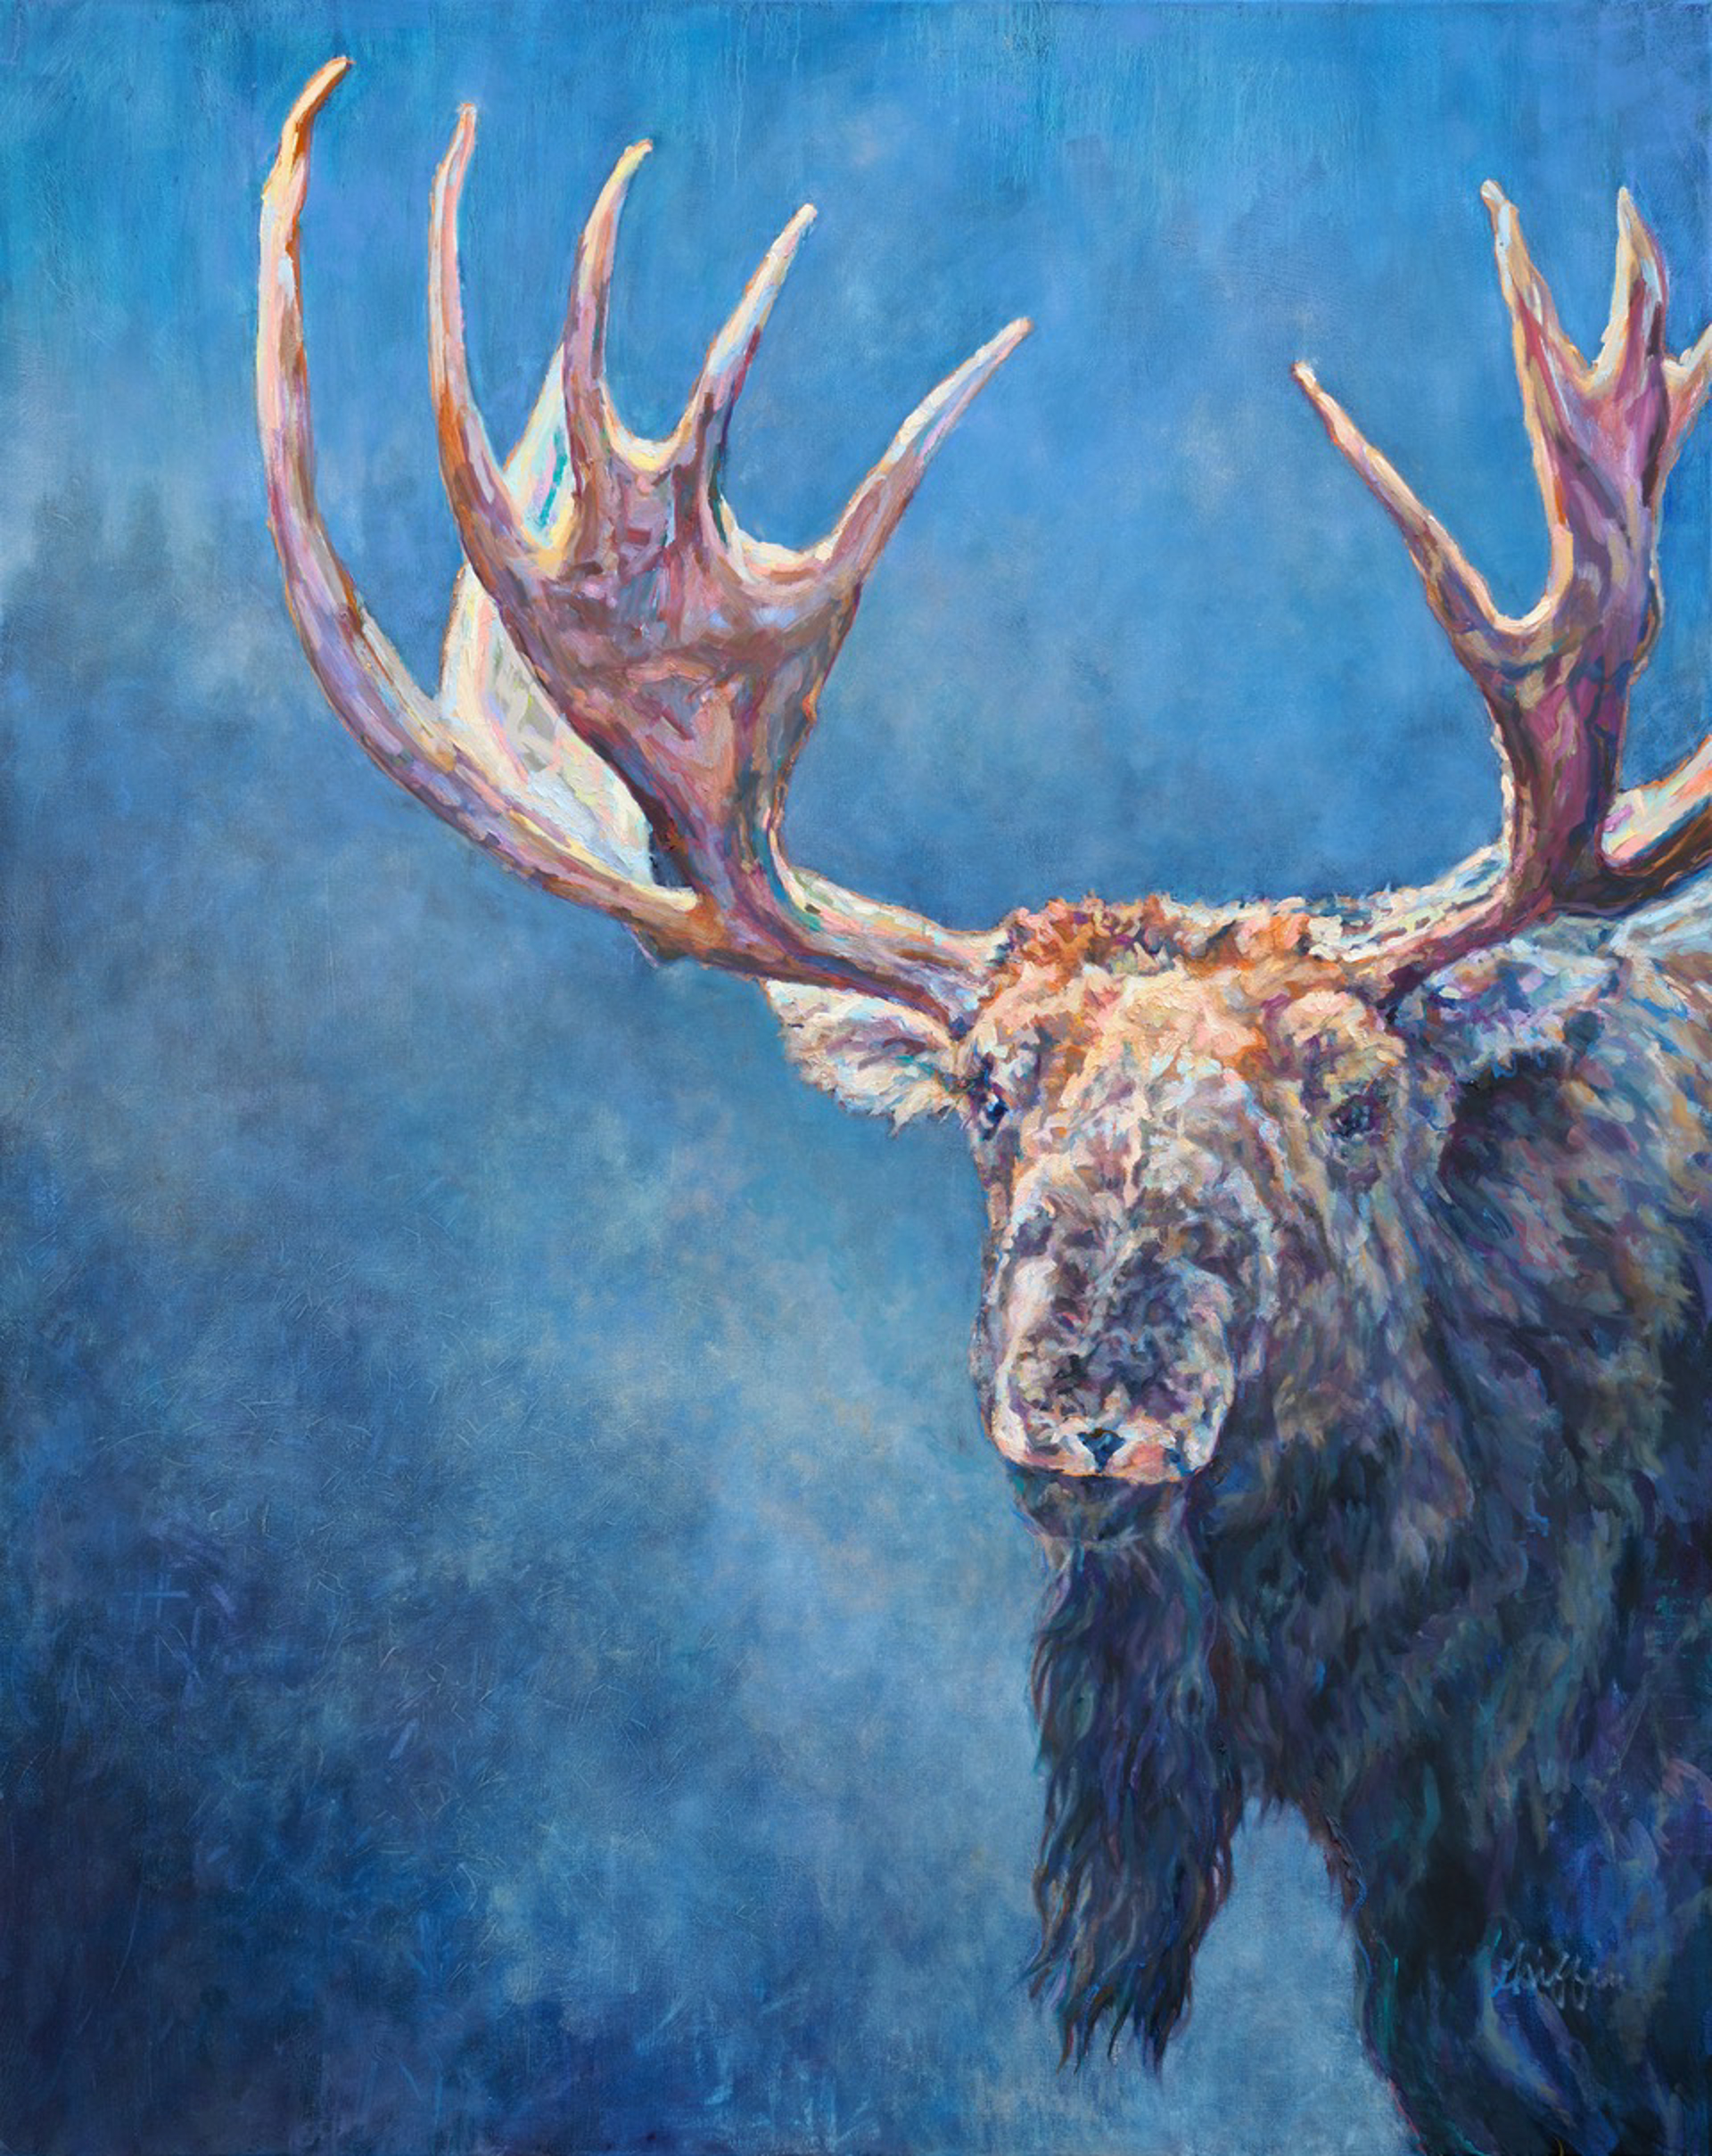 Patricia Griffin Moose Portrait In Oil On Linen, A Contemporary Fine Art Painting and Modern Wildlife Art Piece Available At Gallery Wild